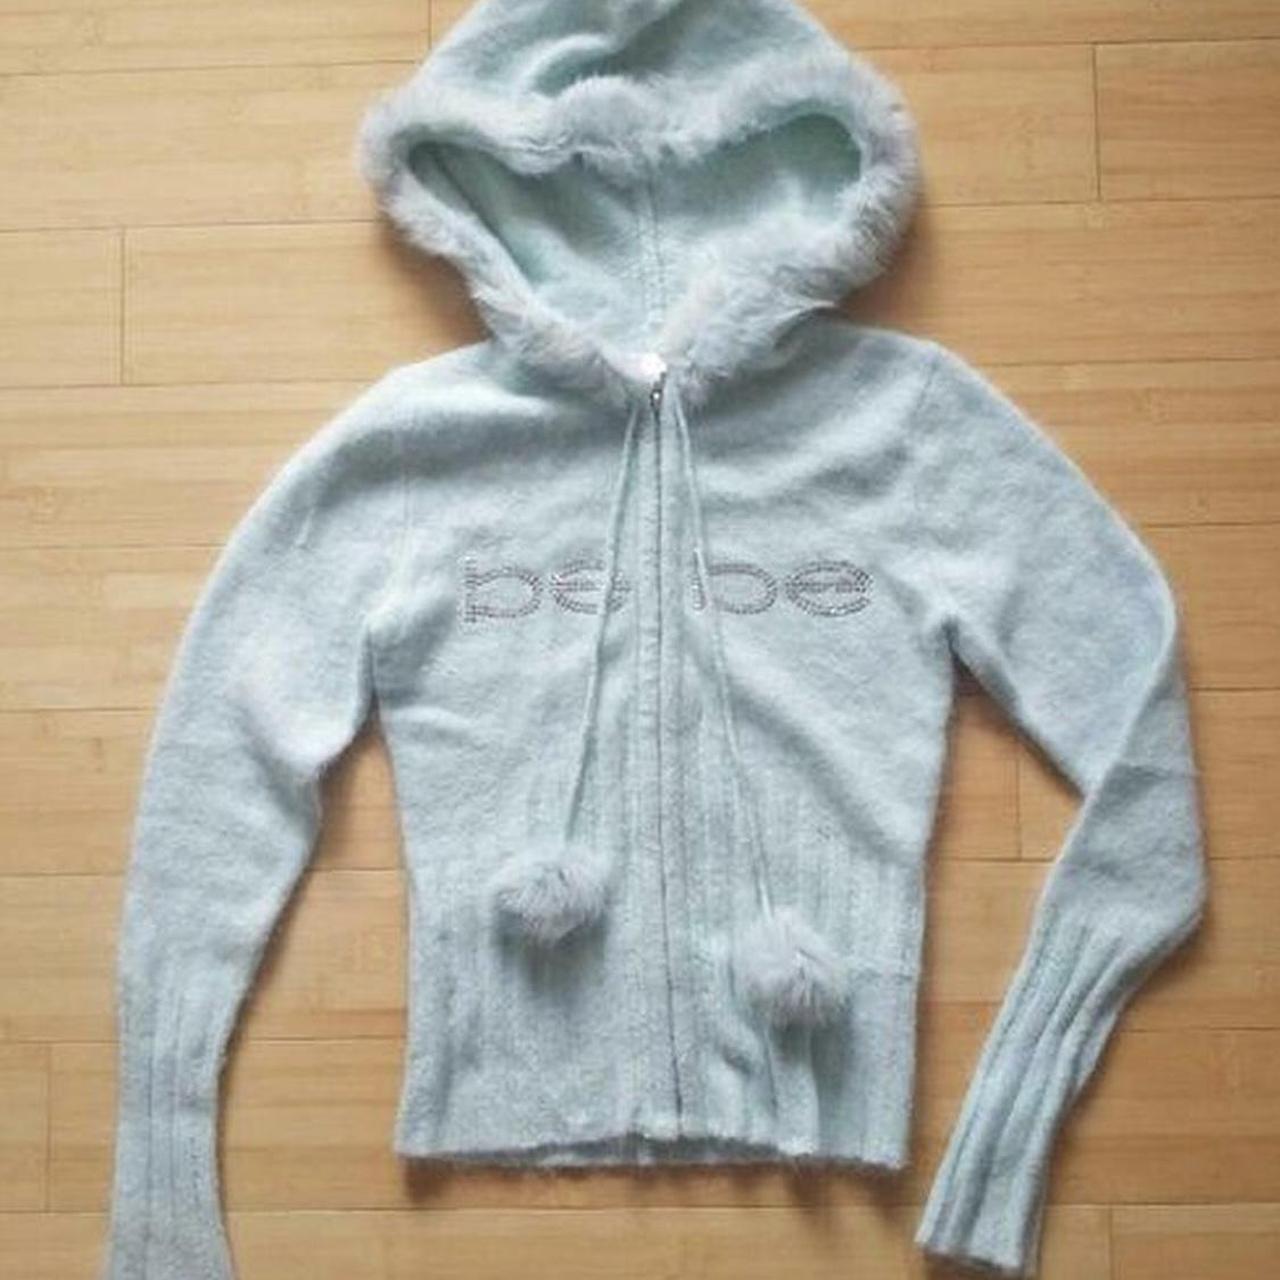 ISO BEBE ZIP UP WITH POM POMS in size small or... - Depop